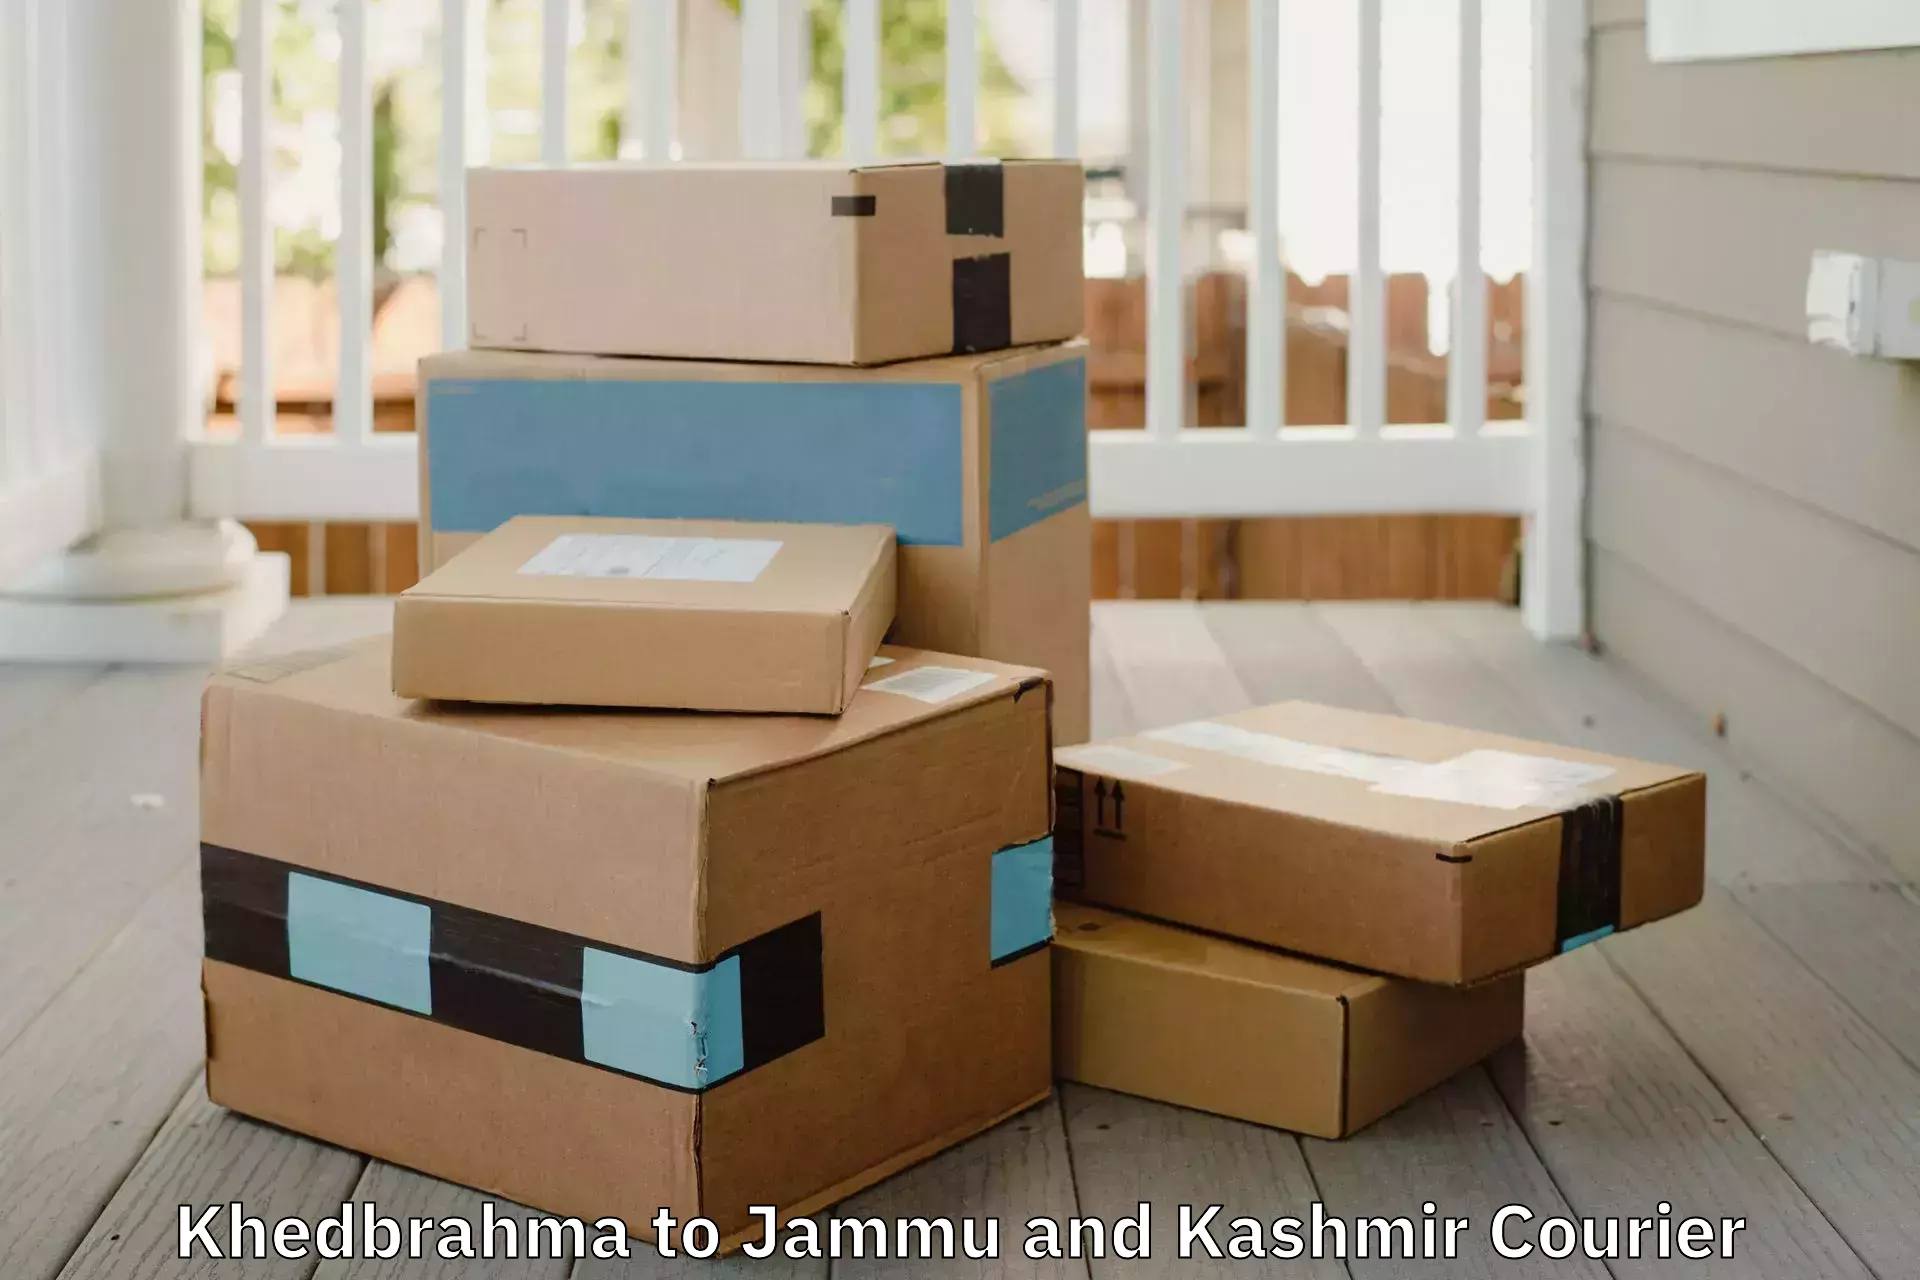 Cost-effective moving options Khedbrahma to Bandipur